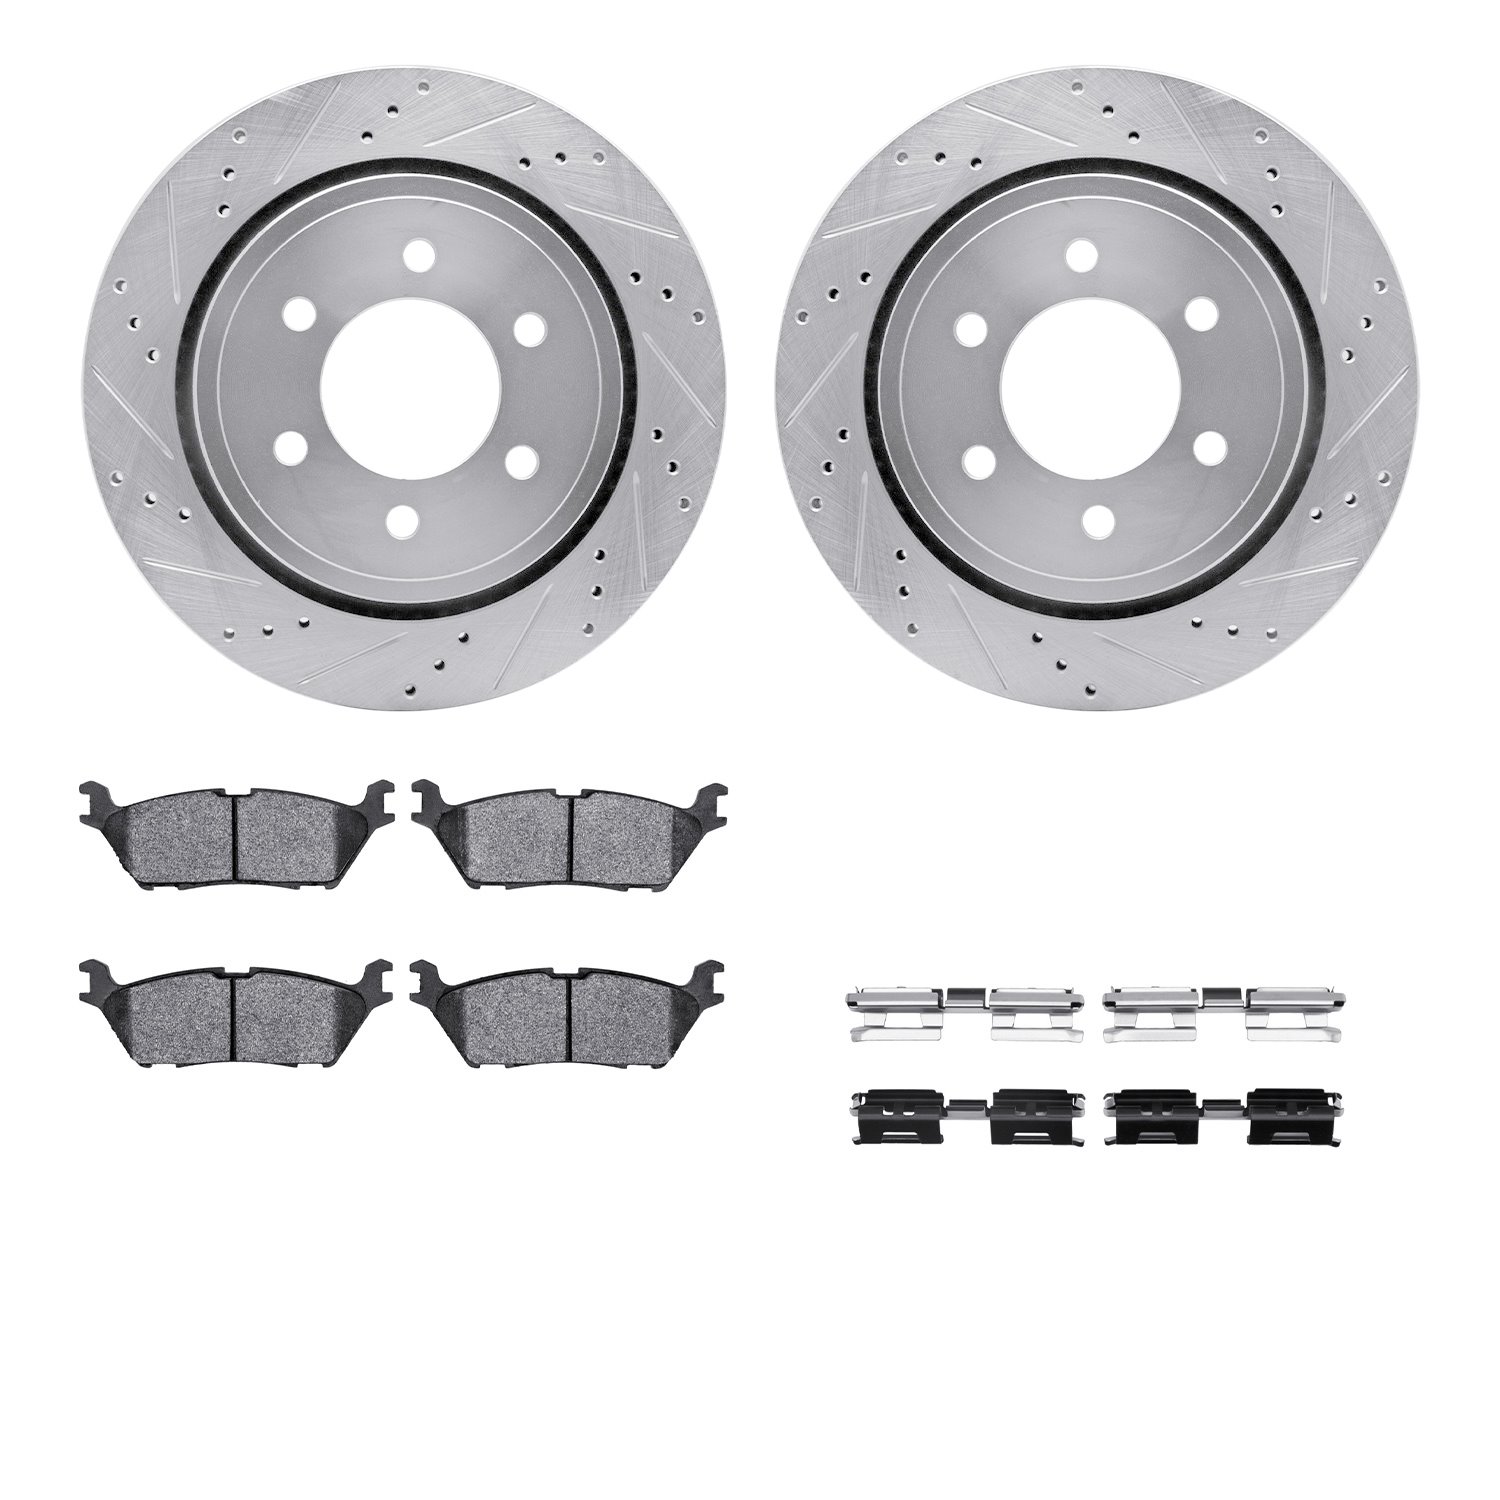 7412-54103 Drilled/Slotted Brake Rotors with Ultimate-Duty Brake Pads Kit & Hardware [Silver], 2015-2017 Ford/Lincoln/Mercury/Ma